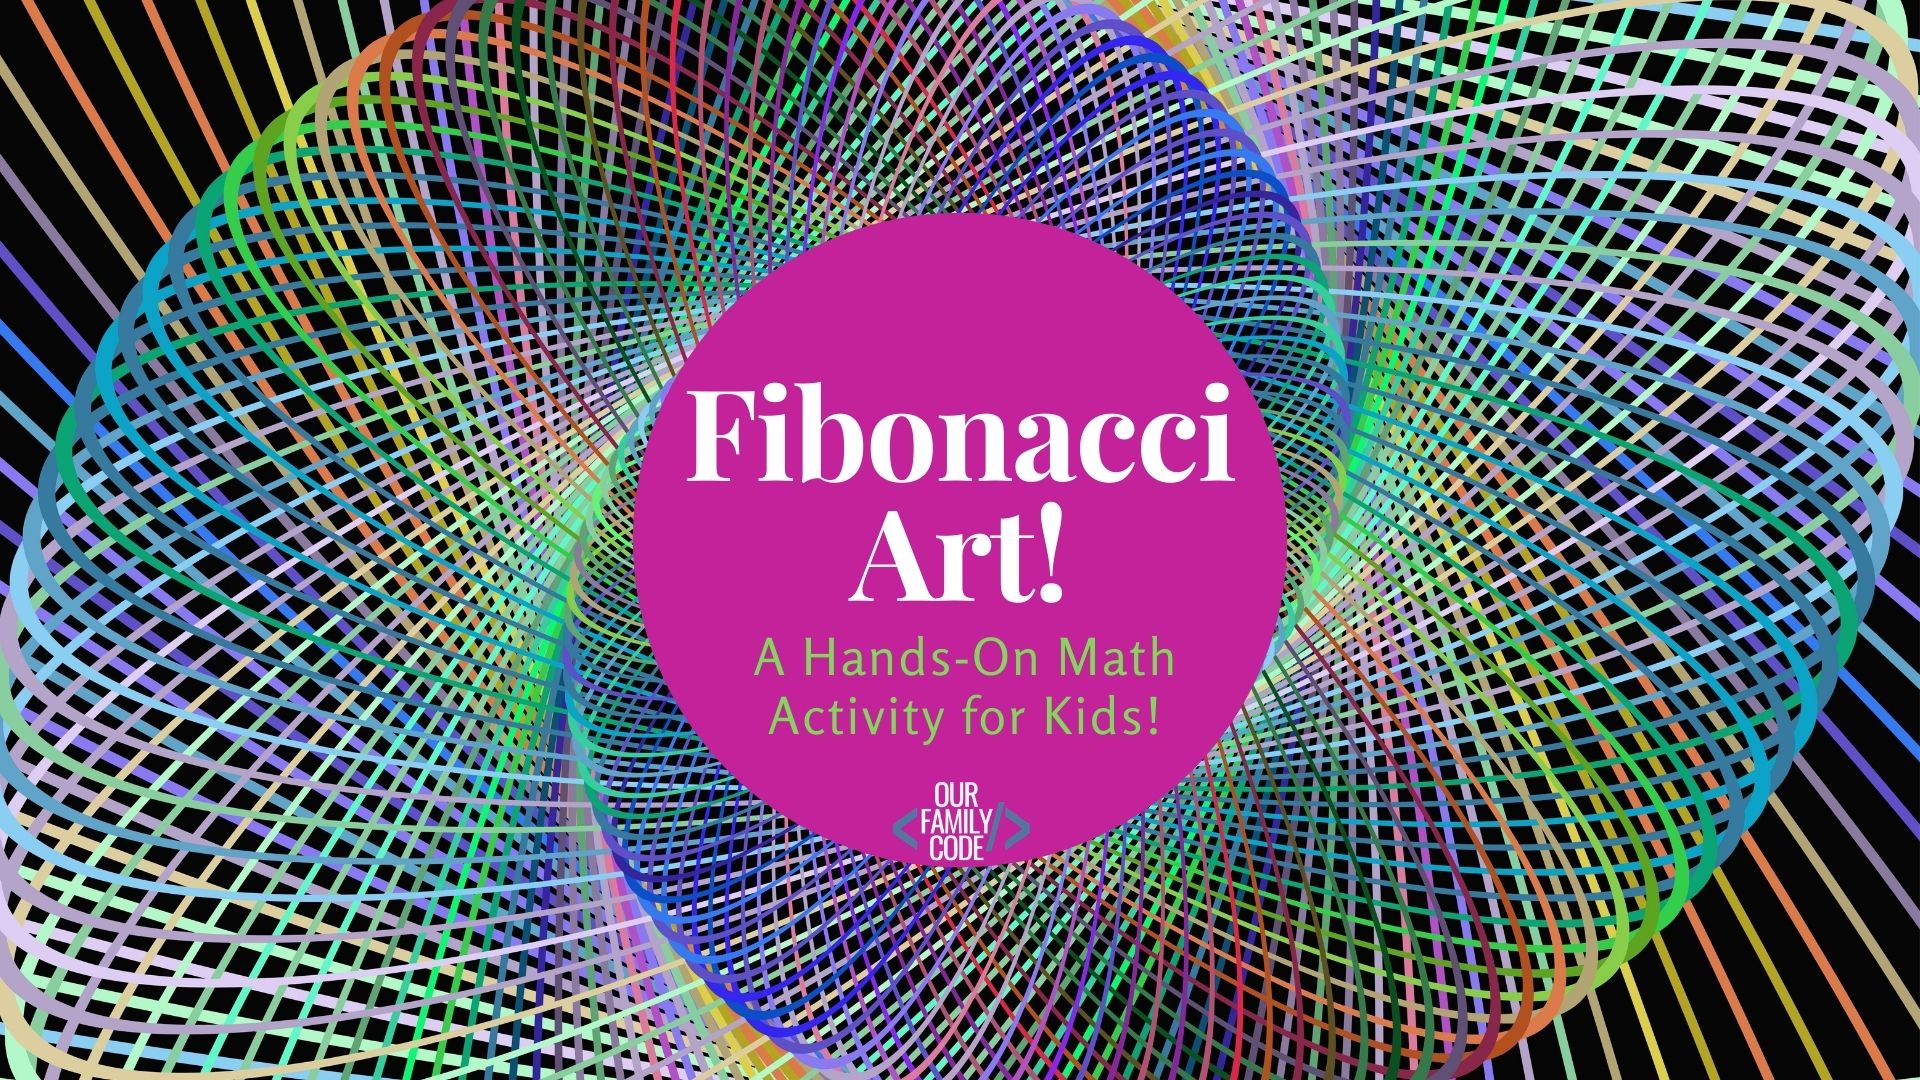 This hands-on math + art activity presents this would-be complex mathematical concept in an easy to understand, tangible way with Fibonacci art and is ideal for elementary-age kids through tweens! 